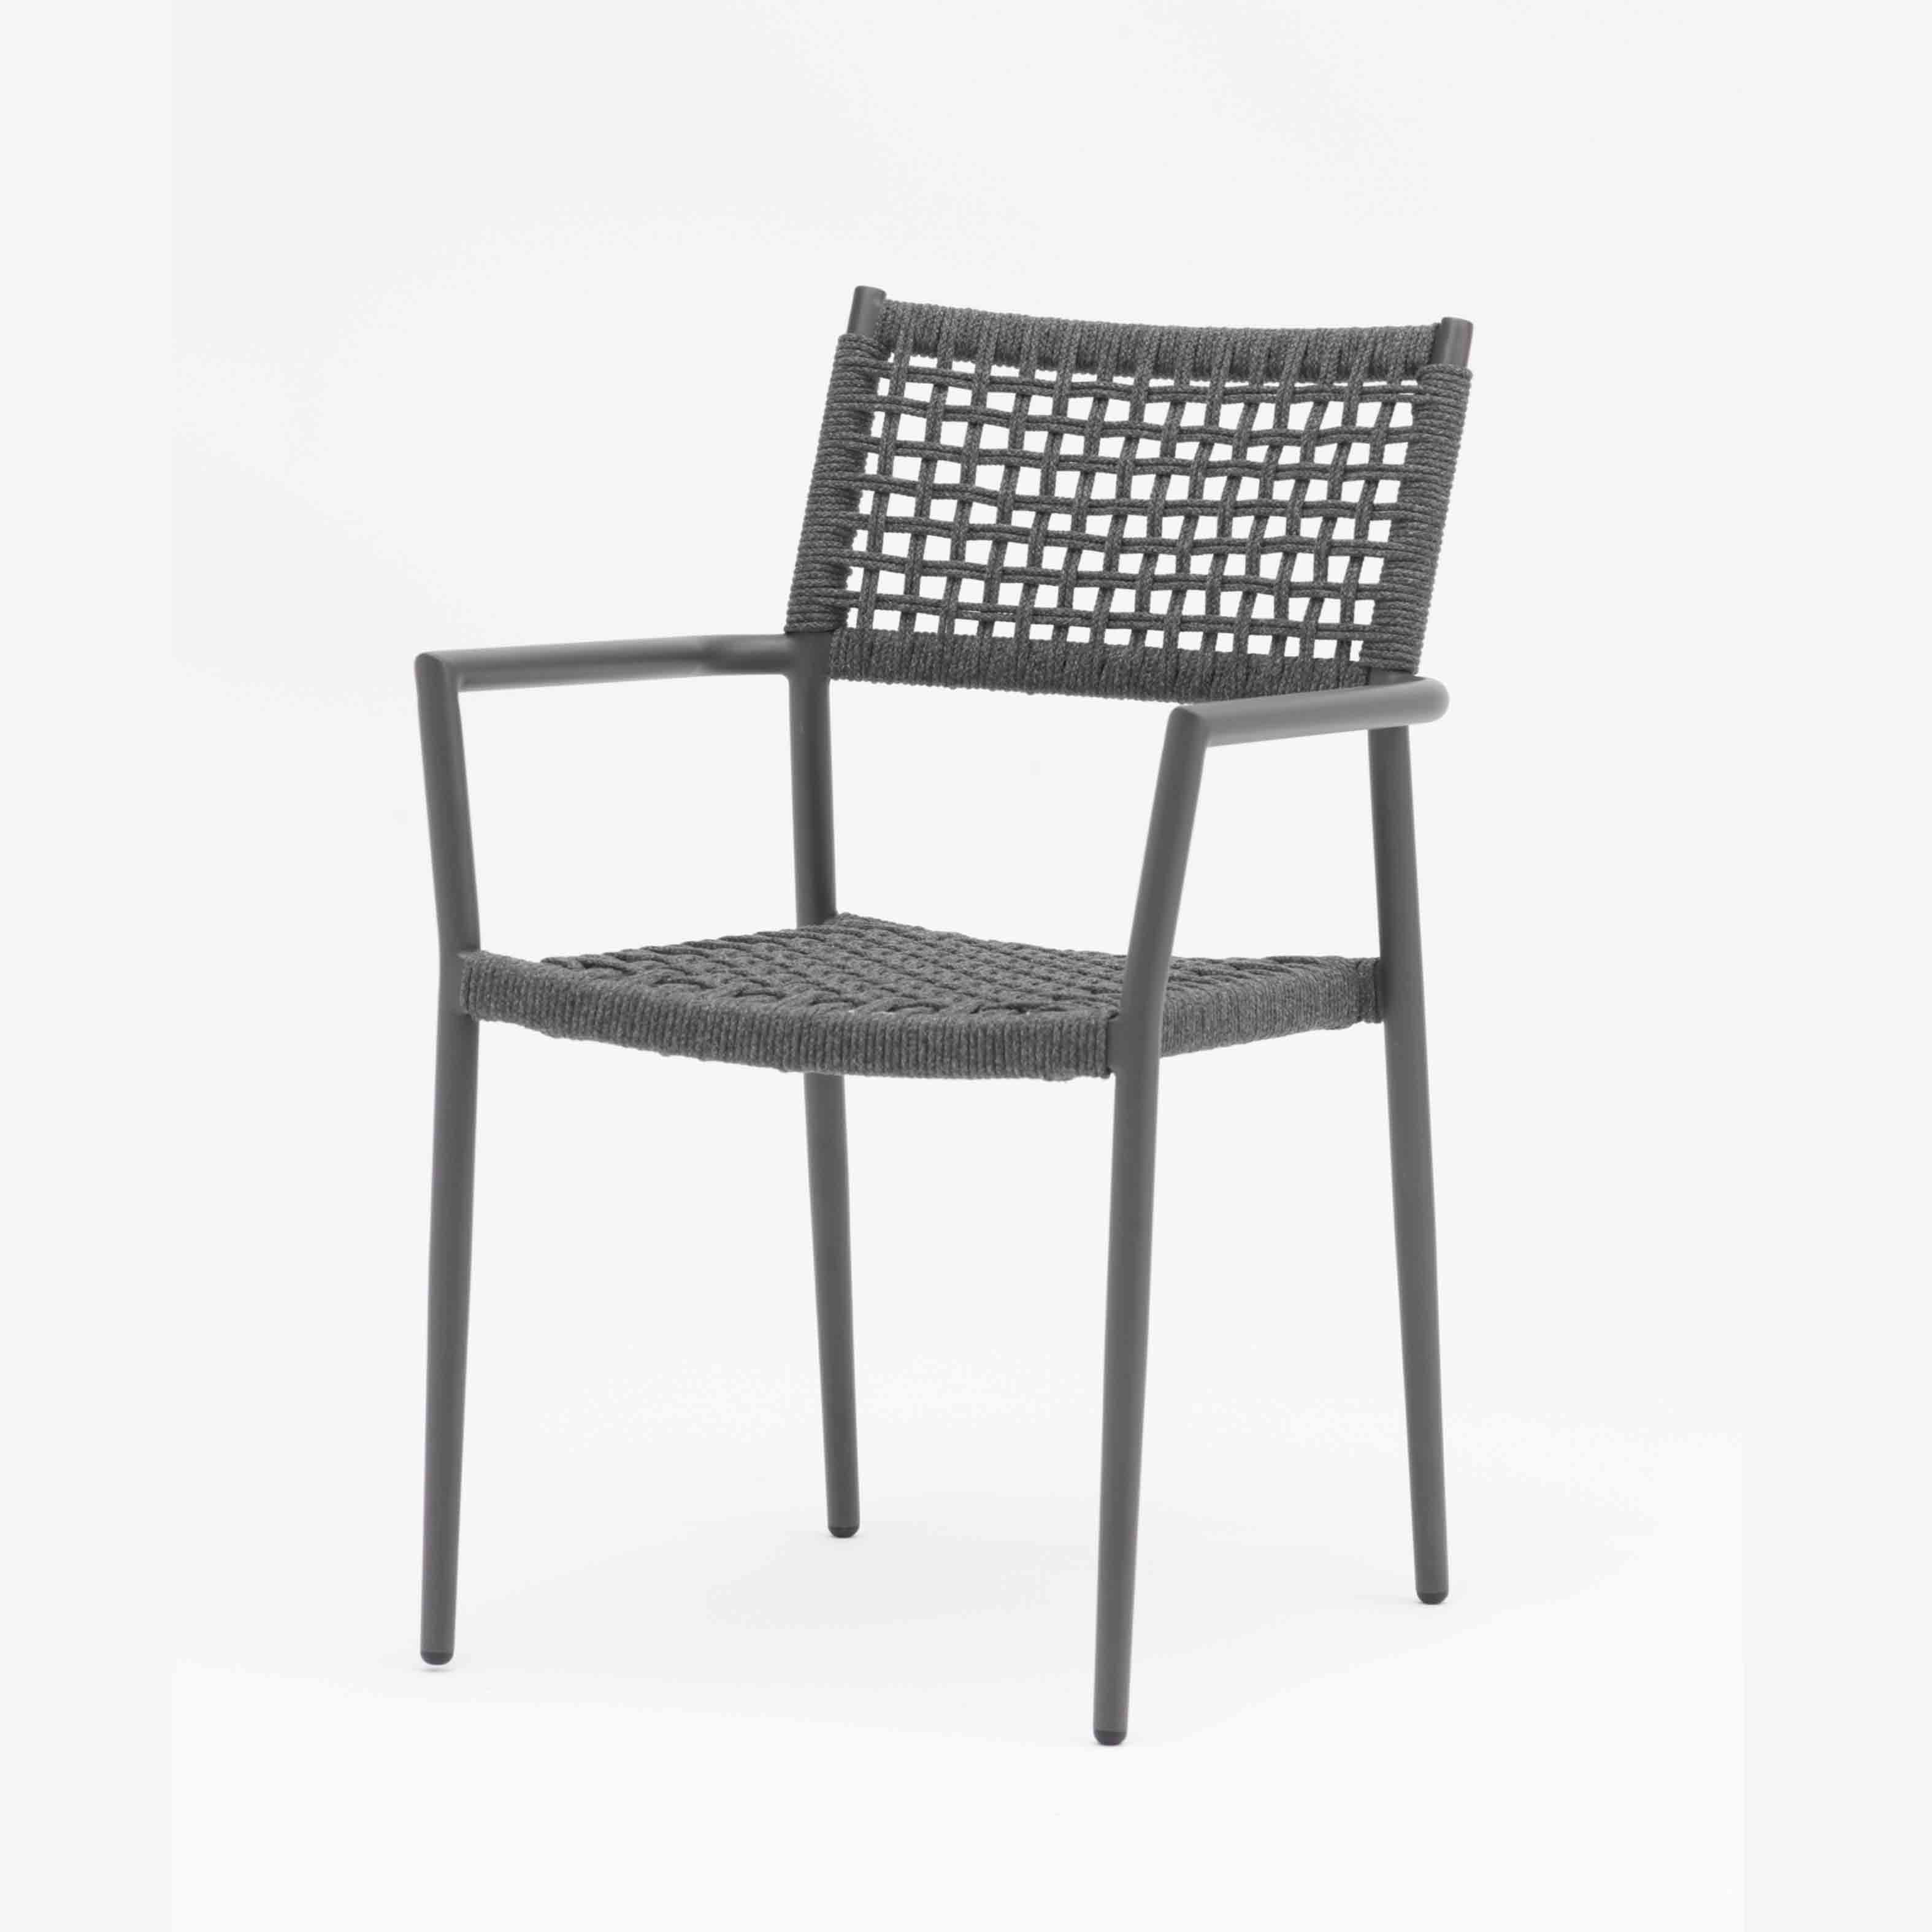 Mocha rope dining chair S8